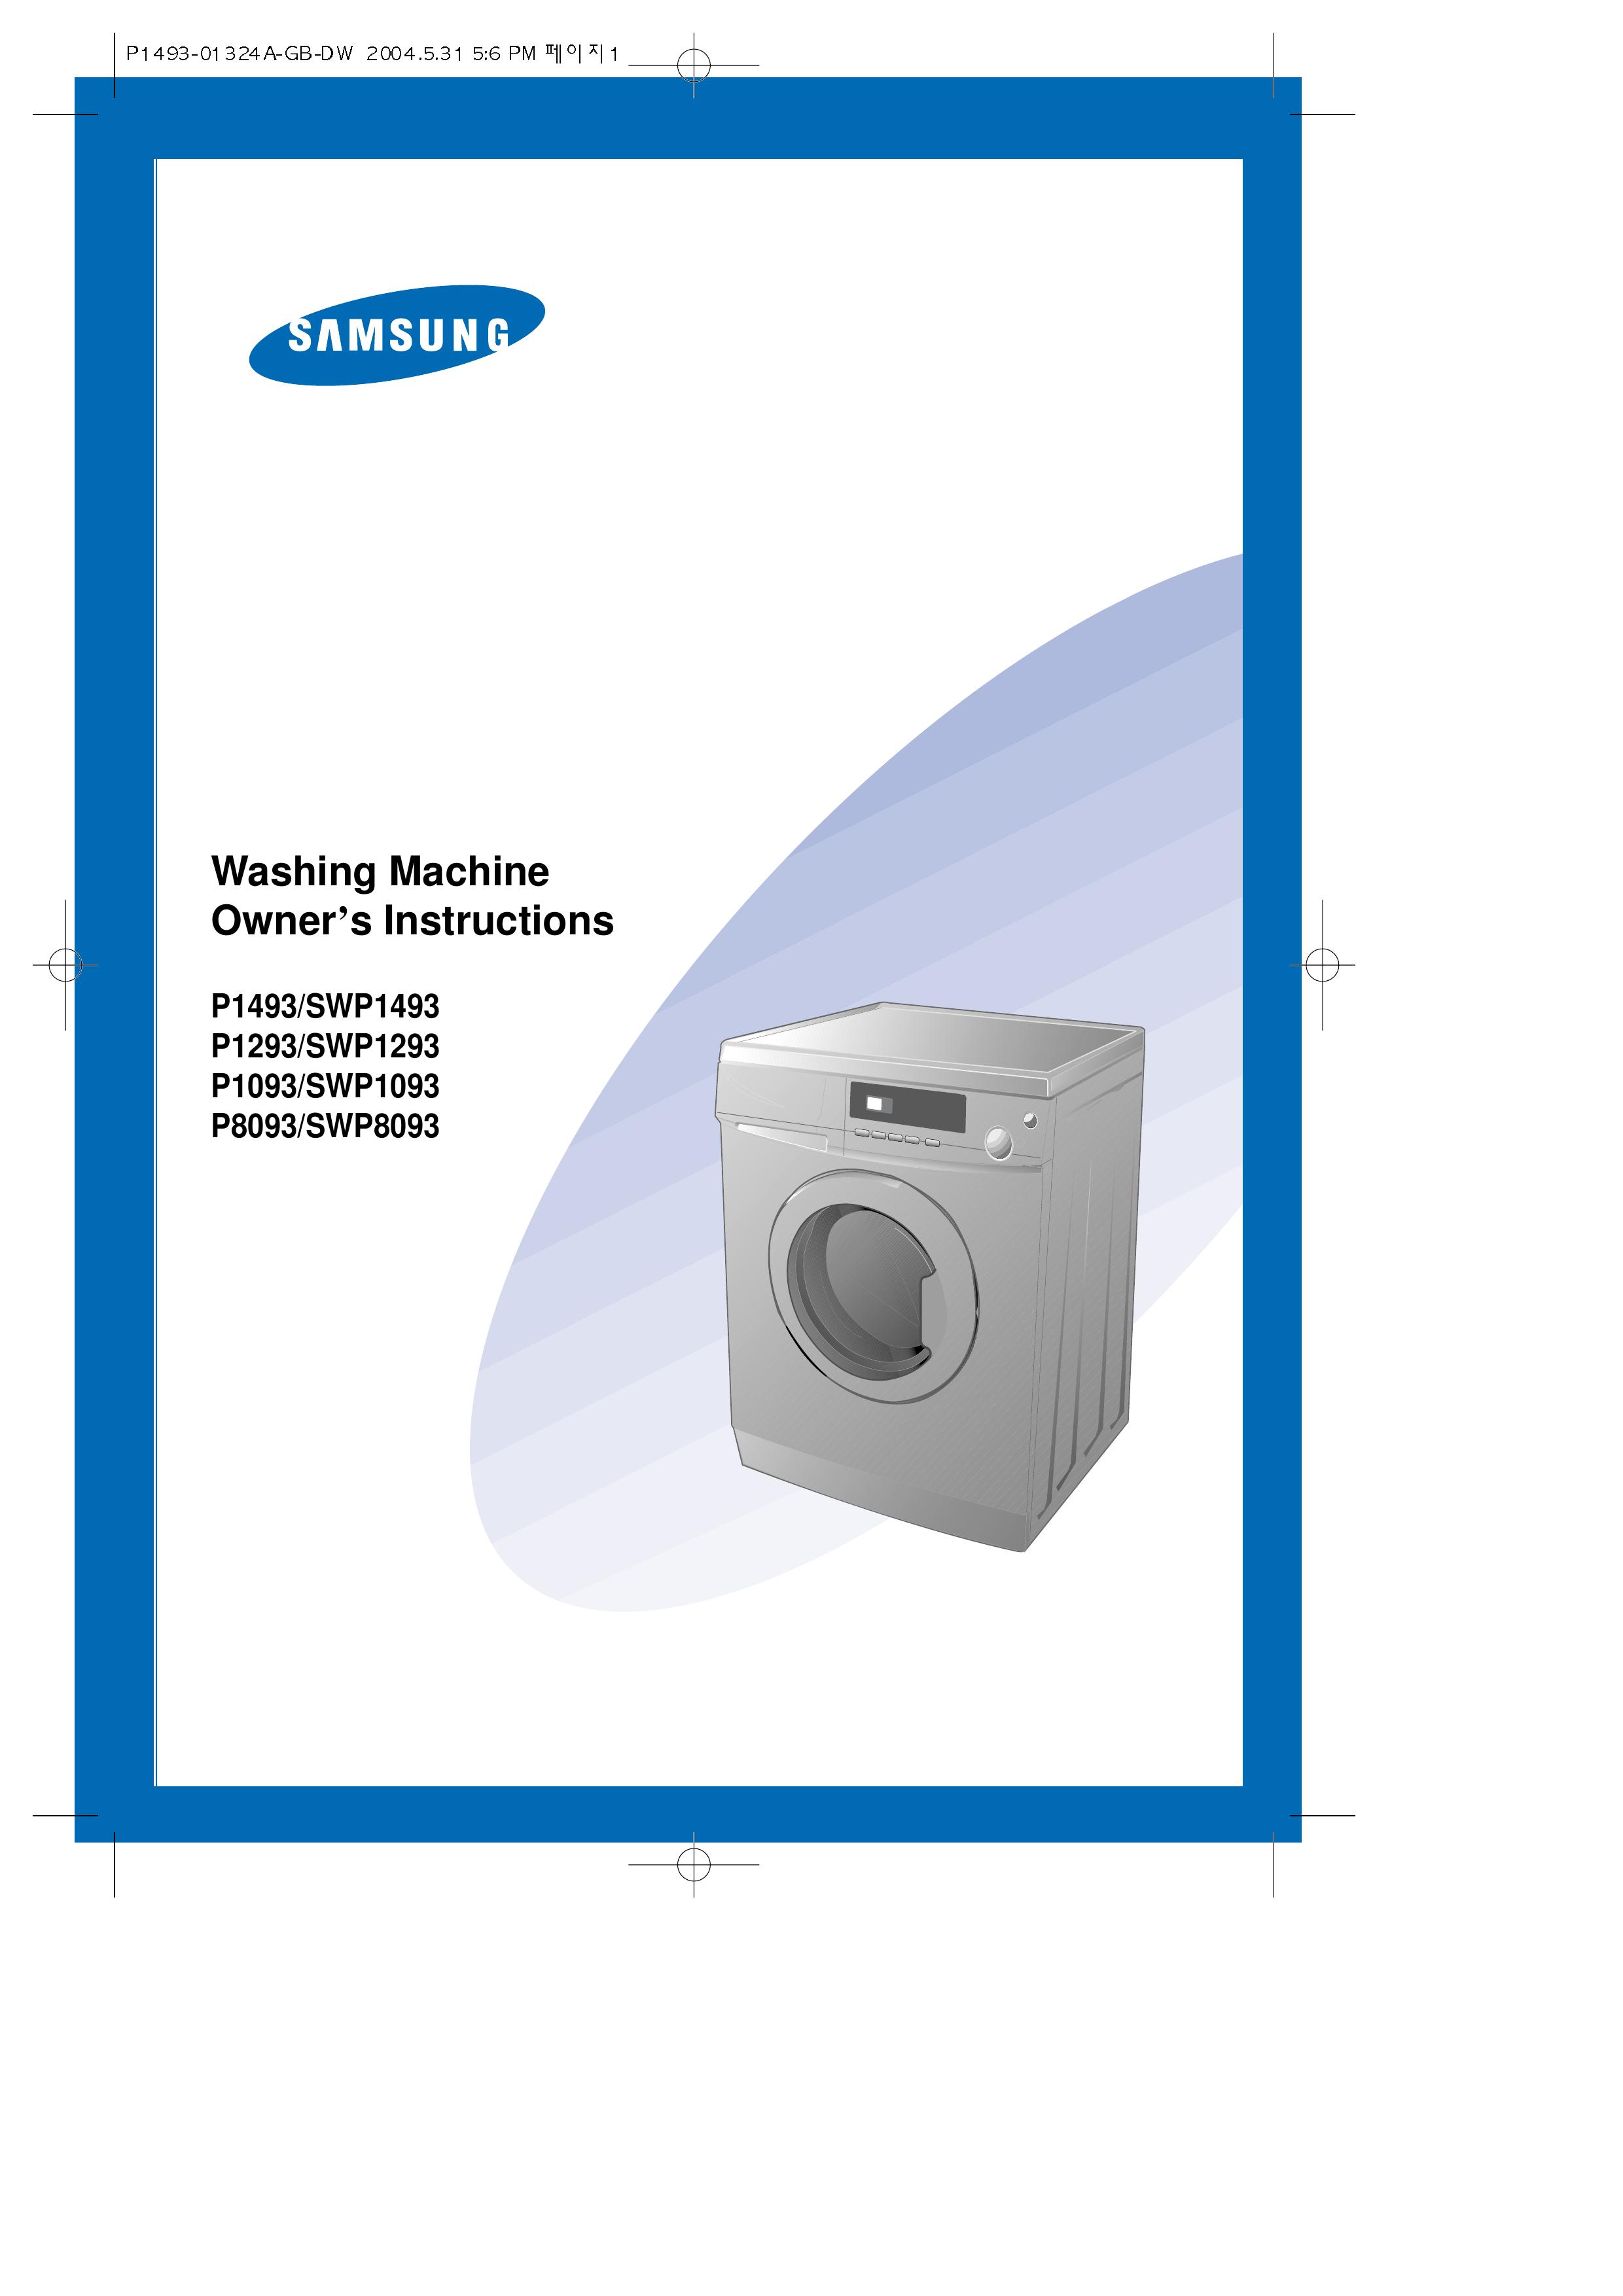 Samsung SWP1493 Washer/Dryer User Manual